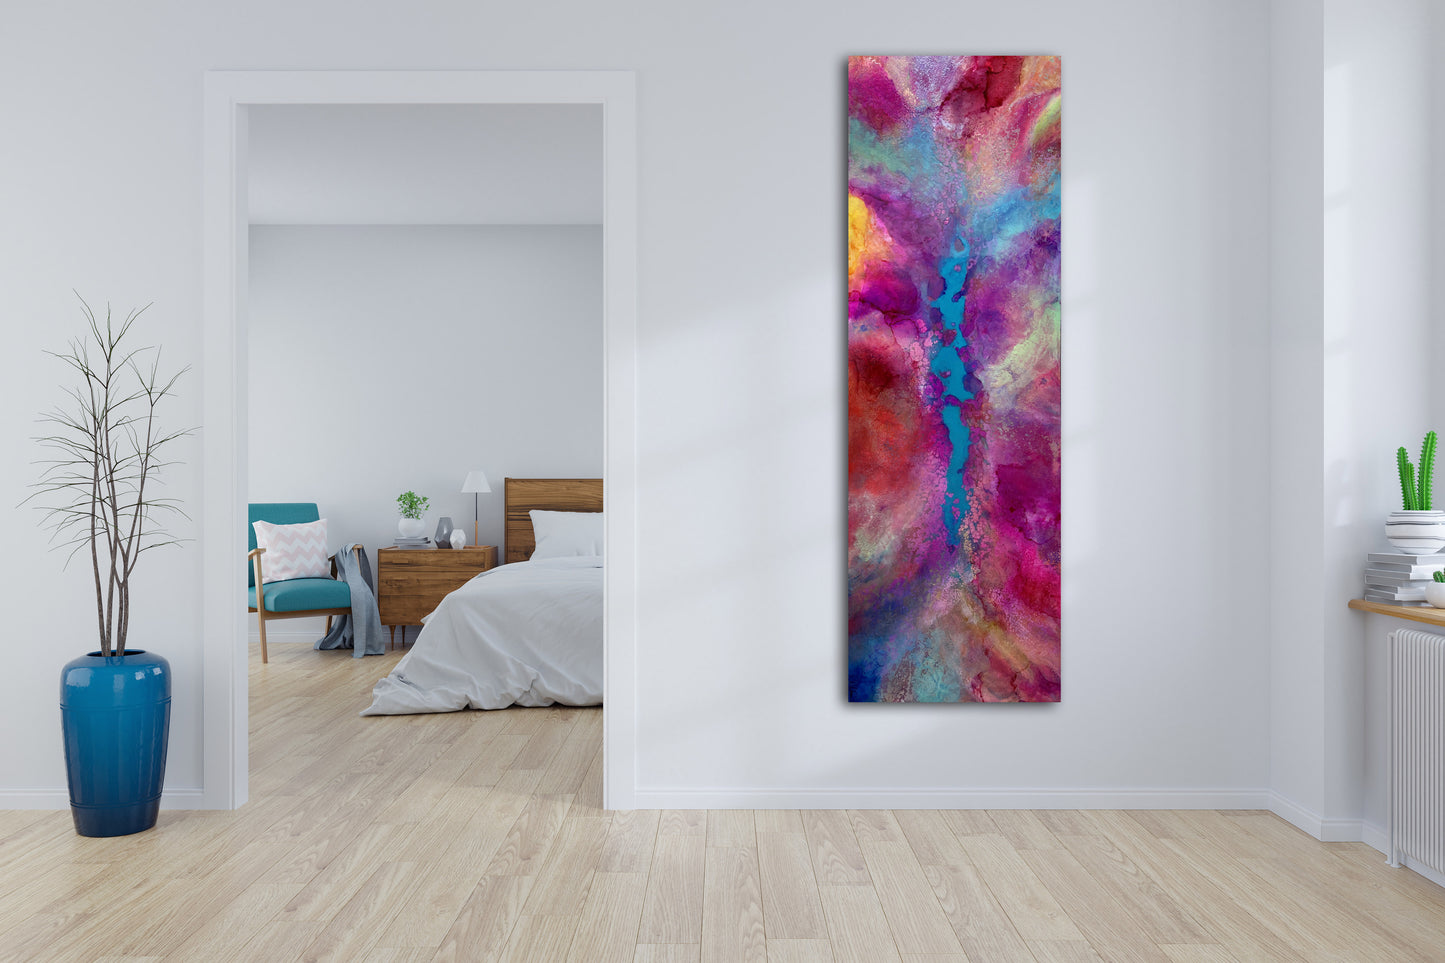 Flowing with Whimsy 24" X 72" - SOLD